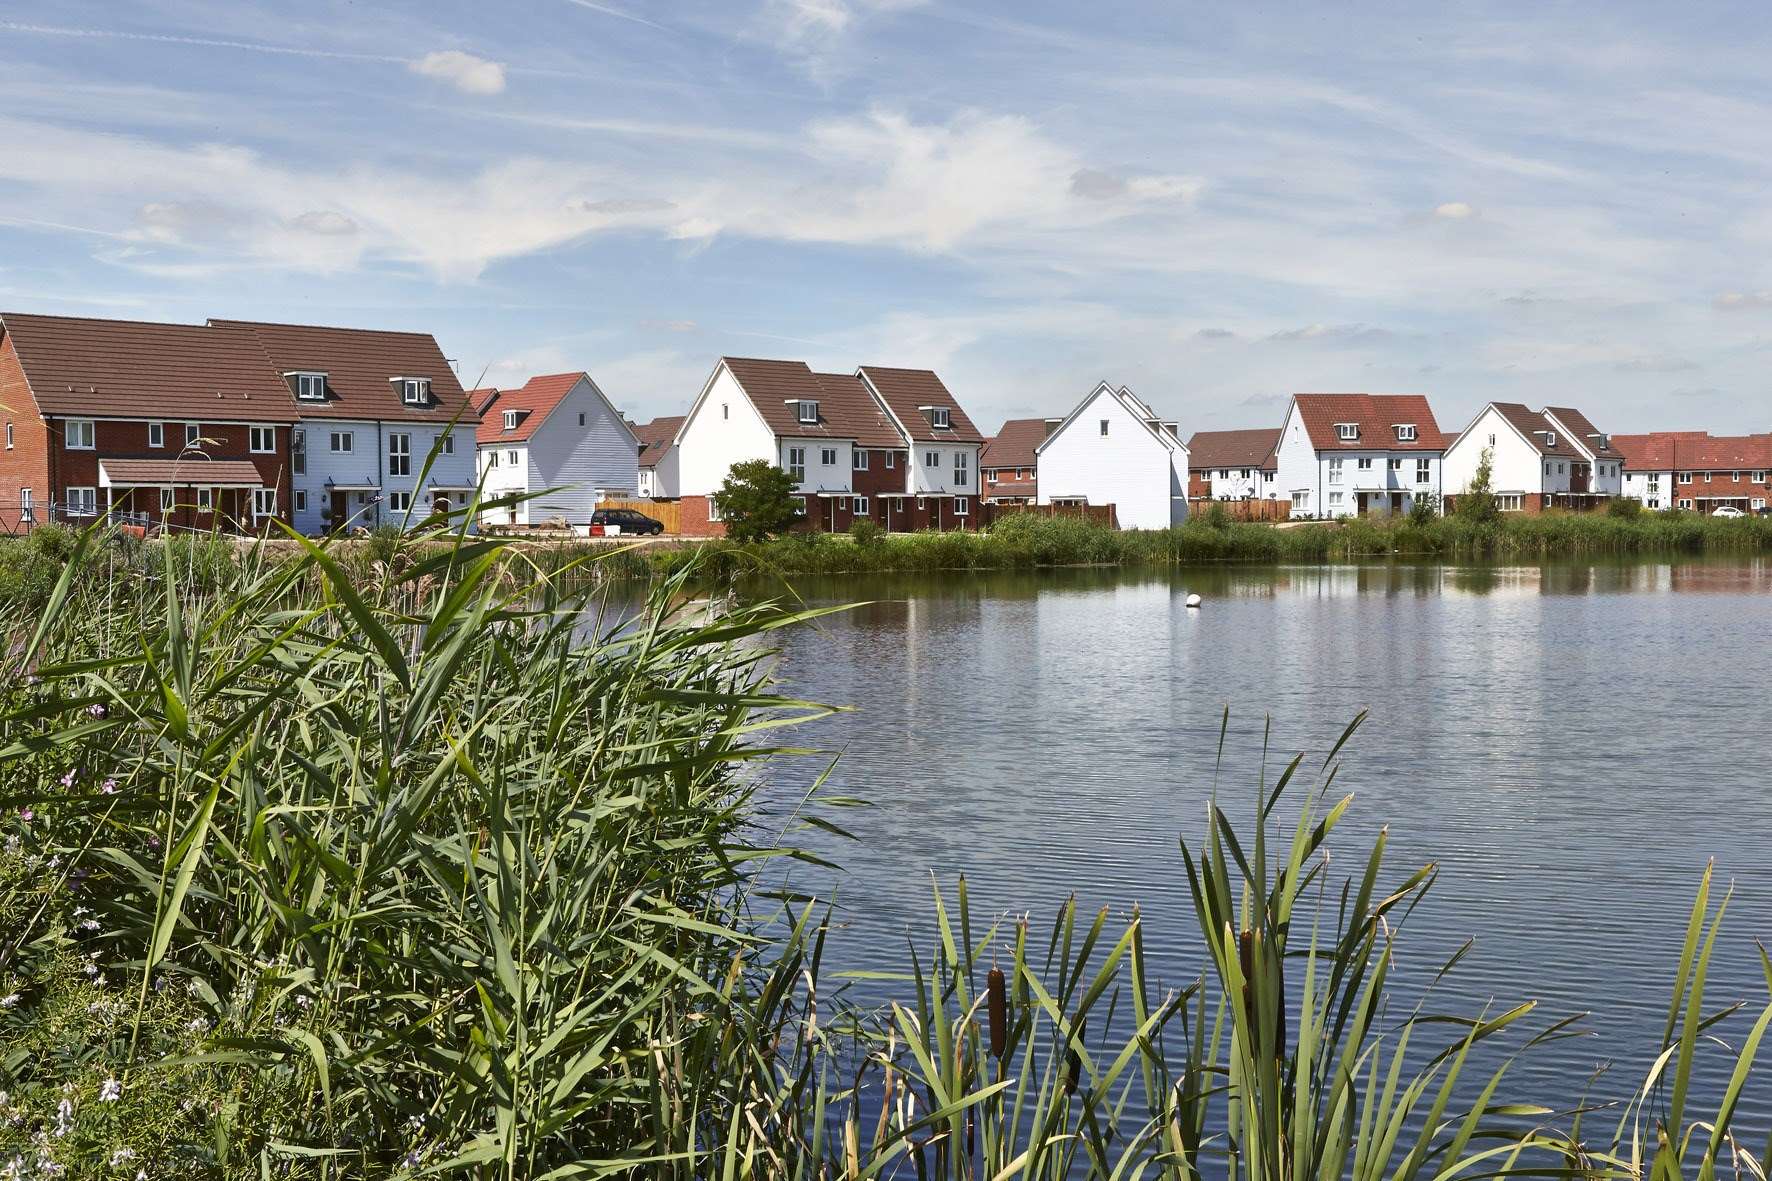 House prices are accelerating quickly in places like Dartford